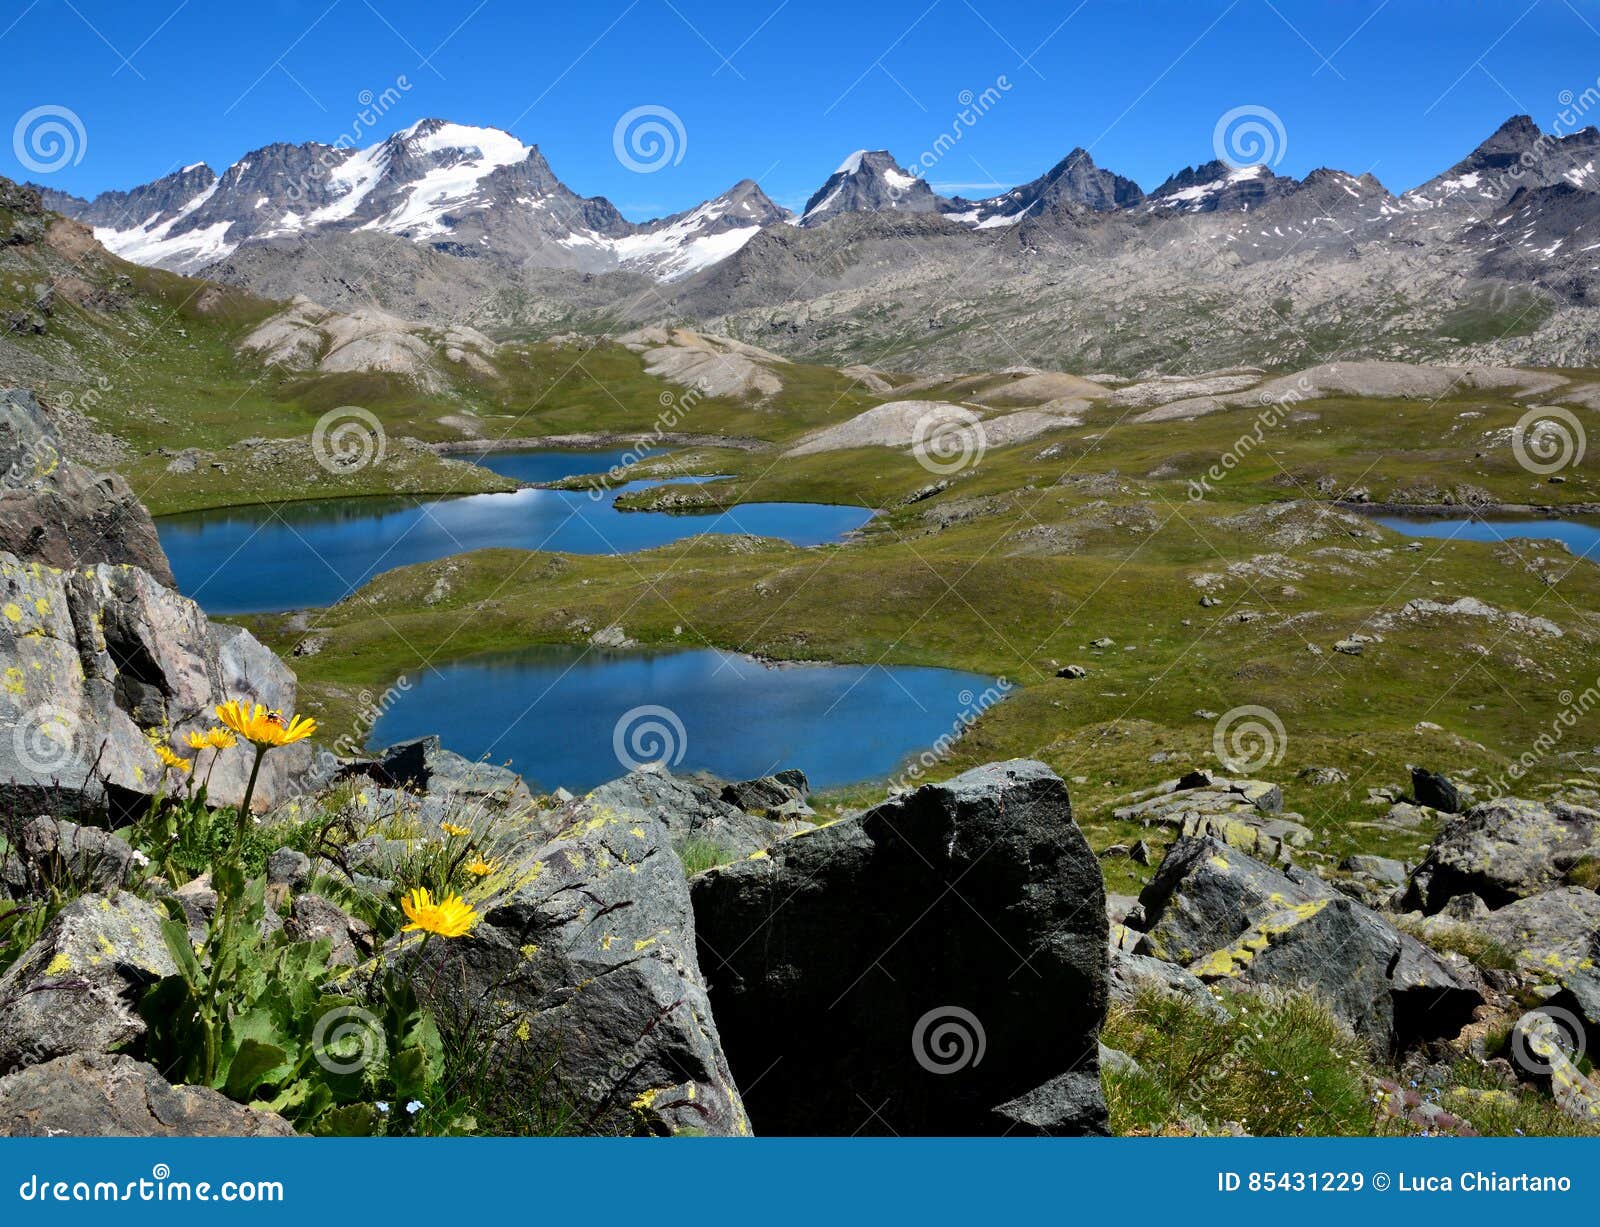 yellow flowers, lakes and mountains in the nivolet plan - gran paradiso national park - italy